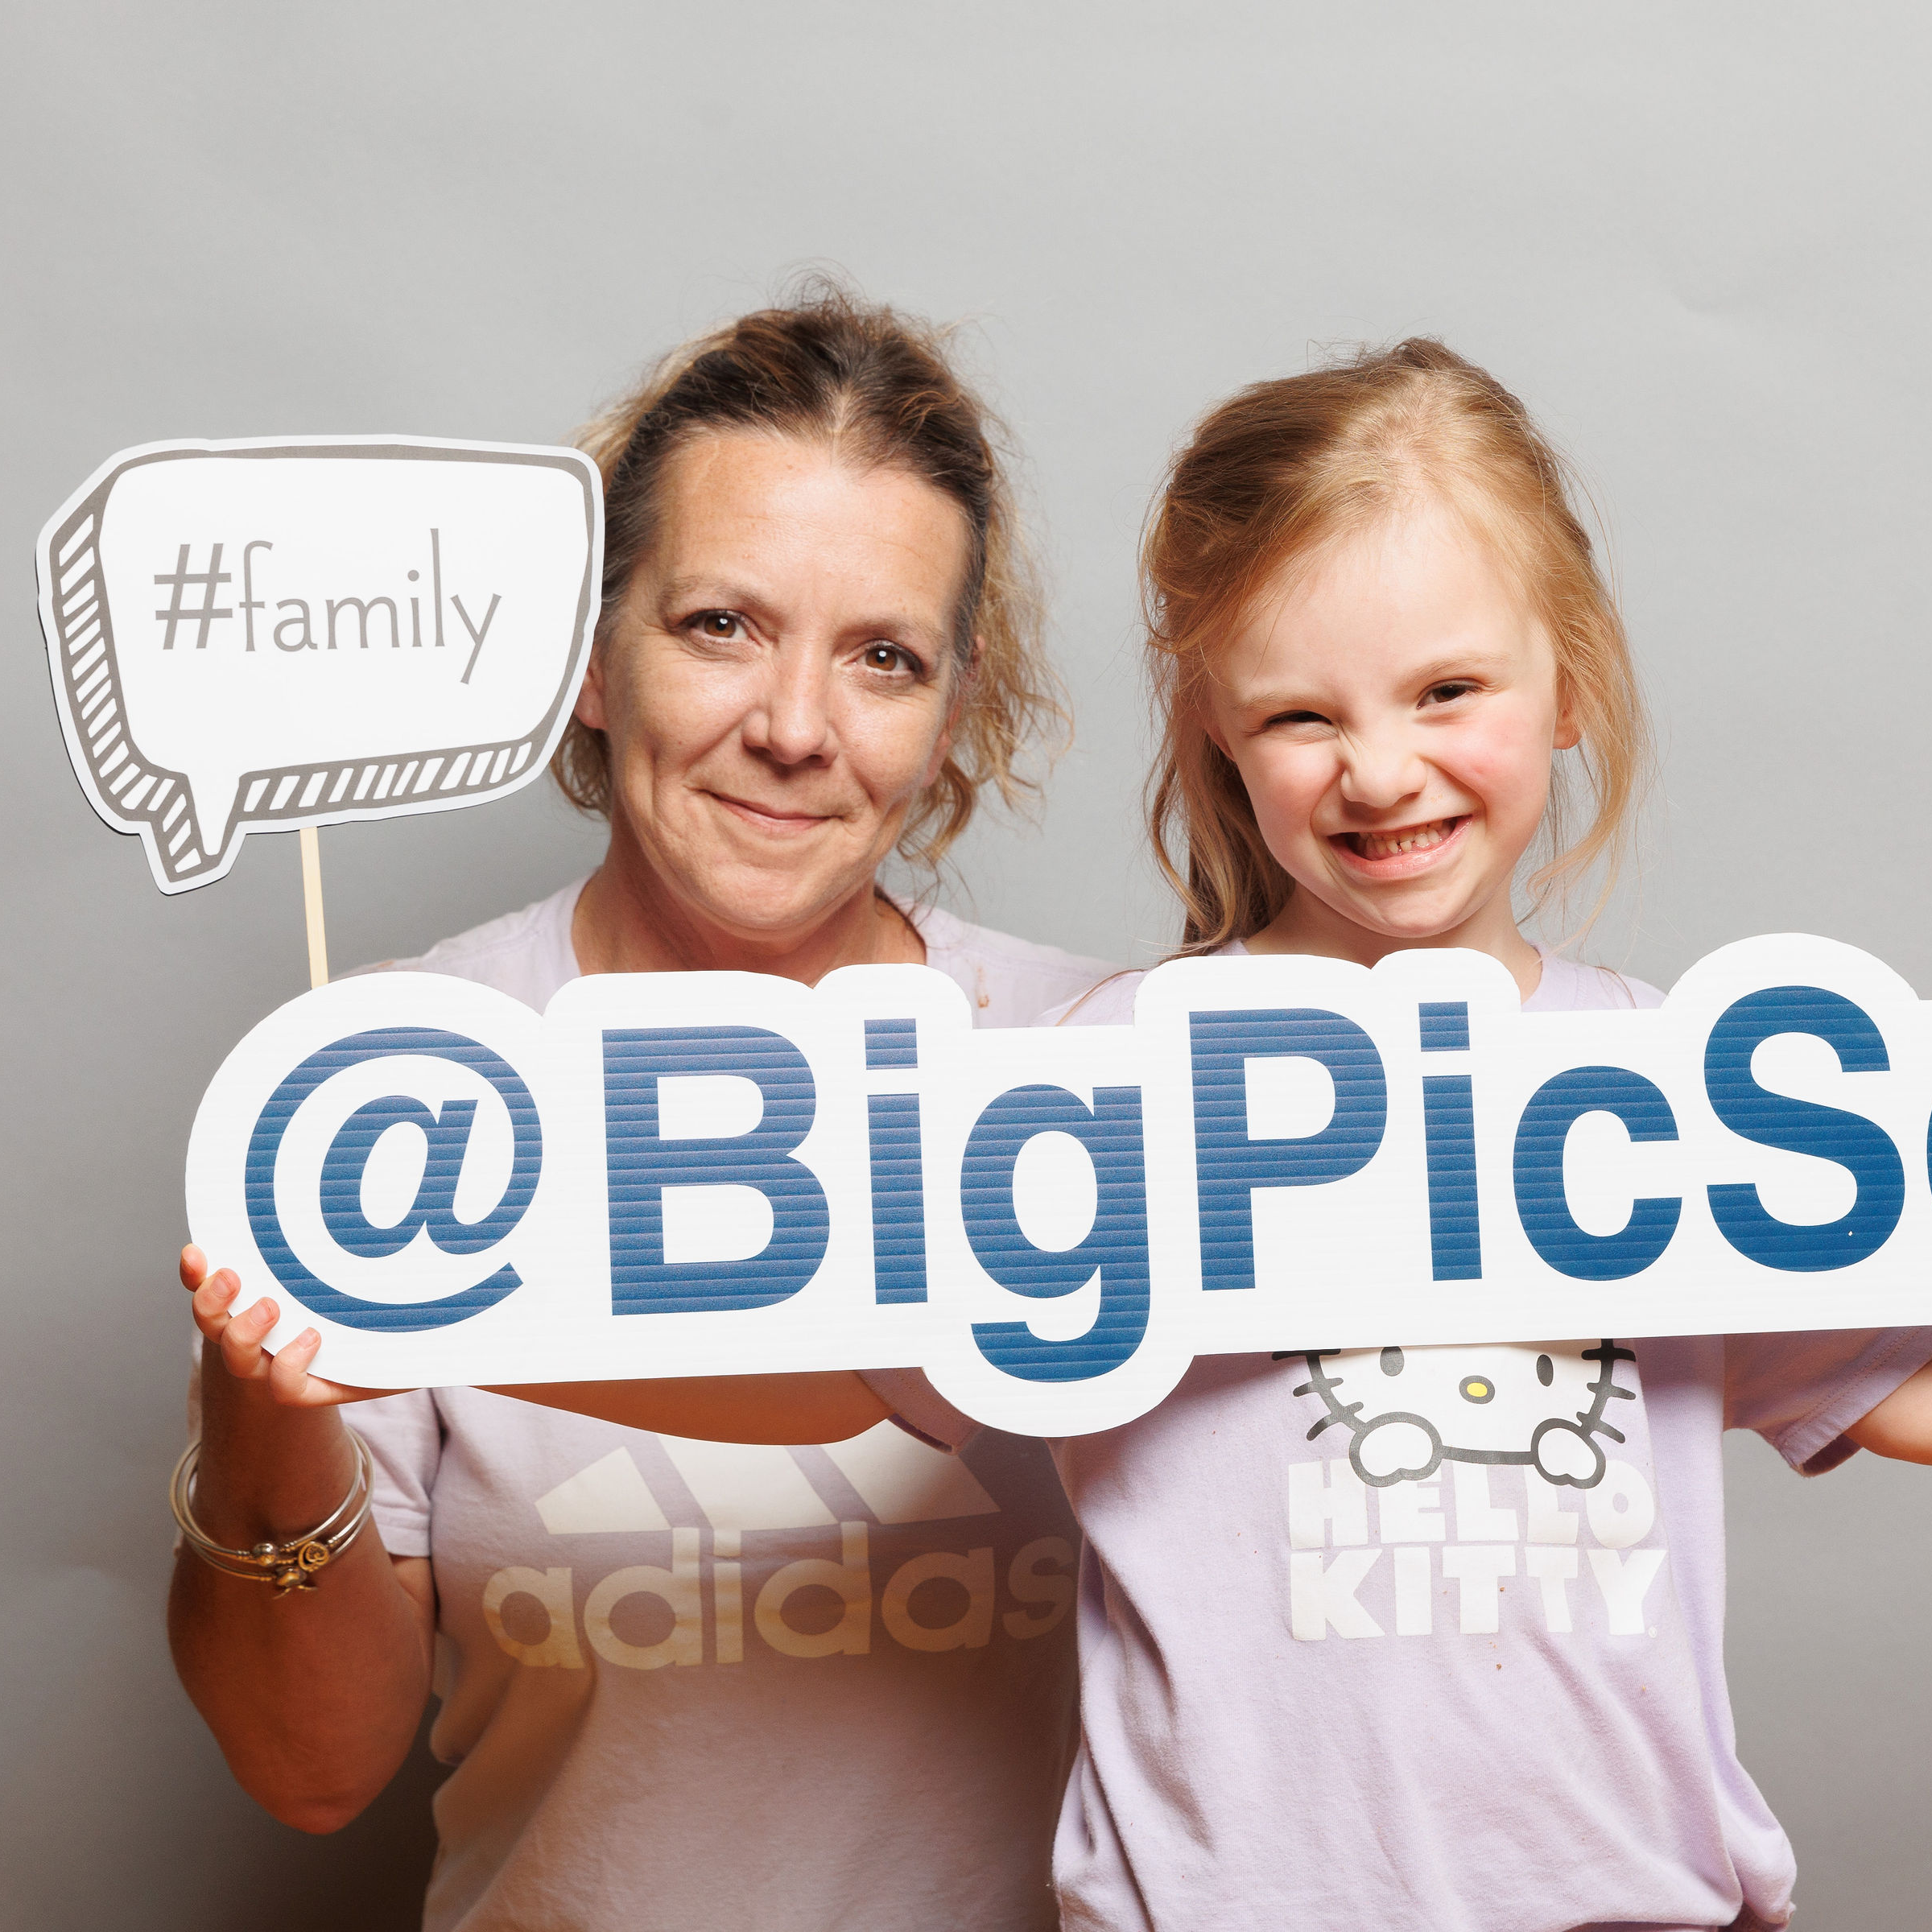 Big Picture Photo Booth